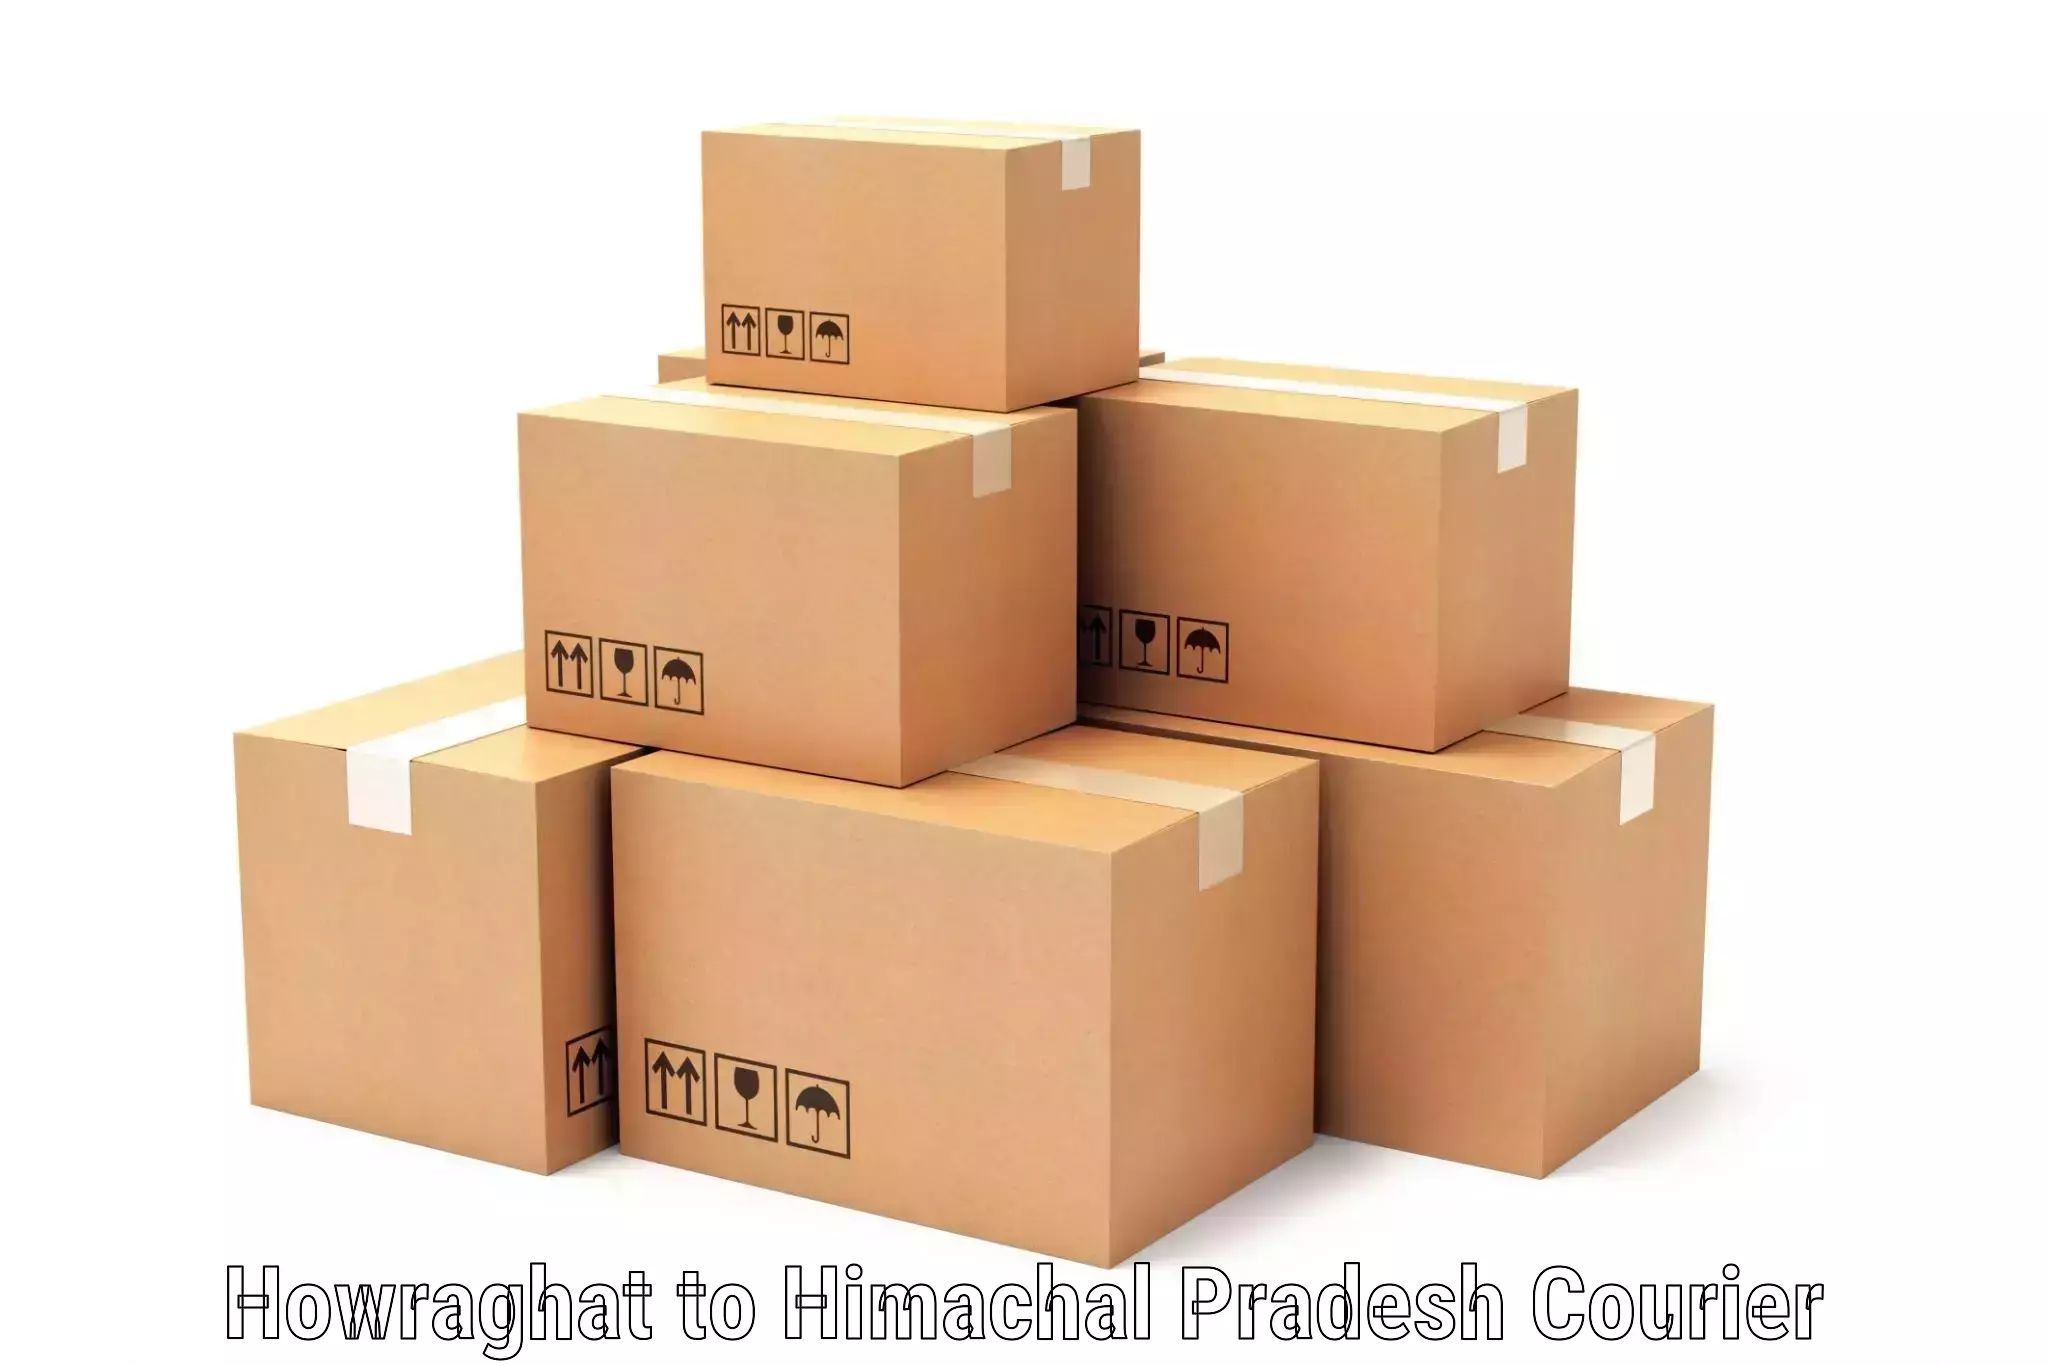 Global freight services Howraghat to Patlikuhal